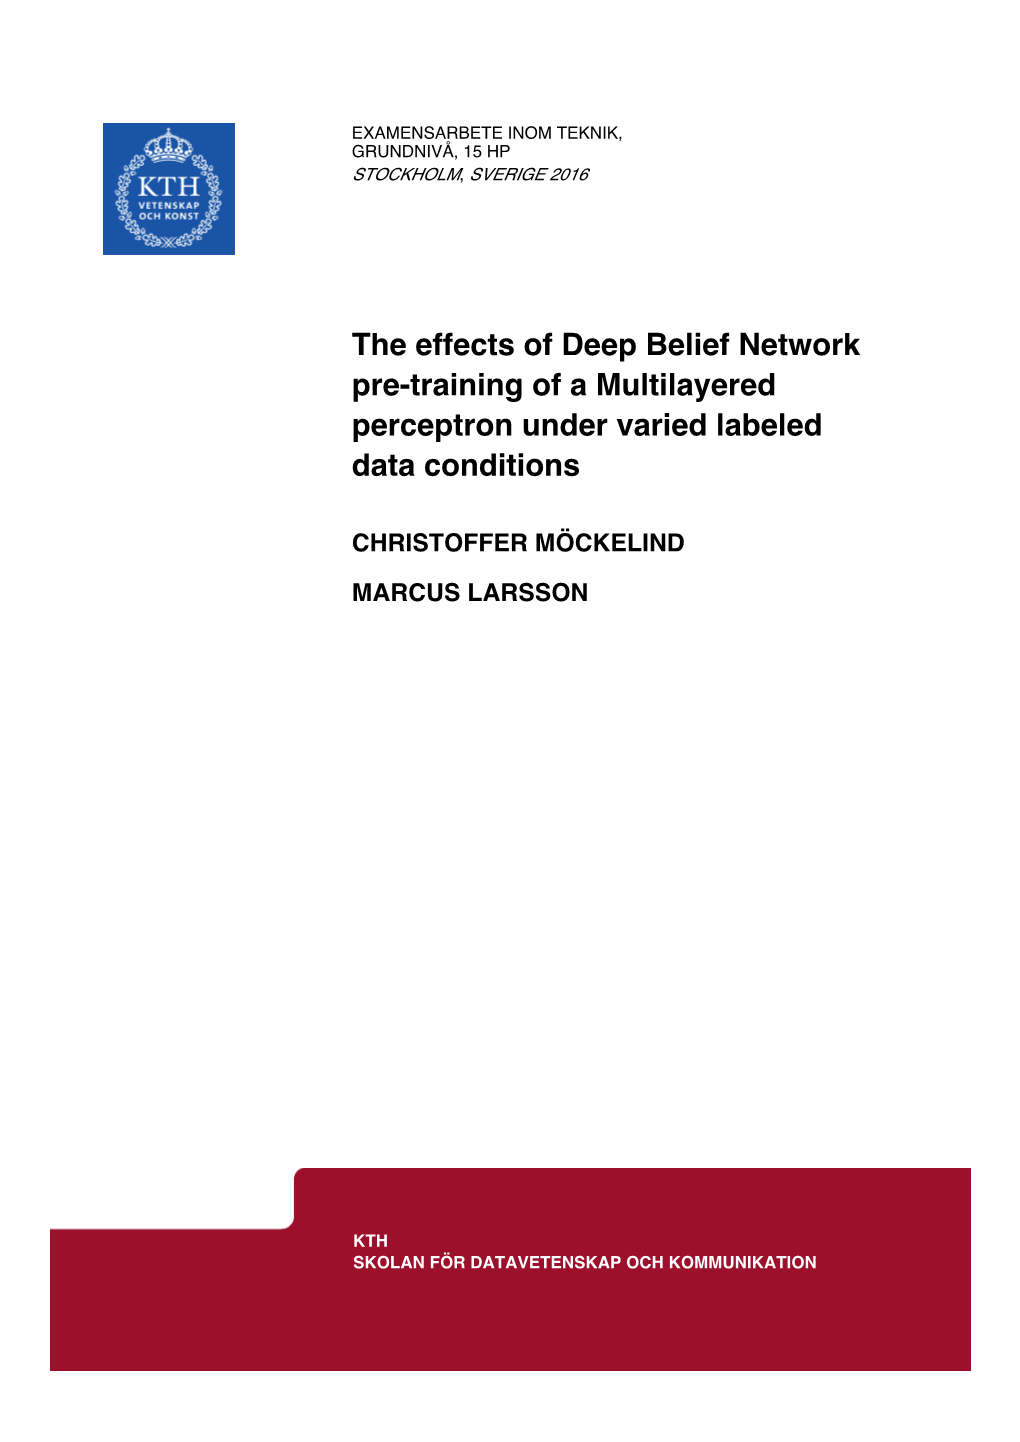 The Effects of Deep Belief Network Pre-Training of a Multilayered Perceptron Under Varied Labeled Data Conditions